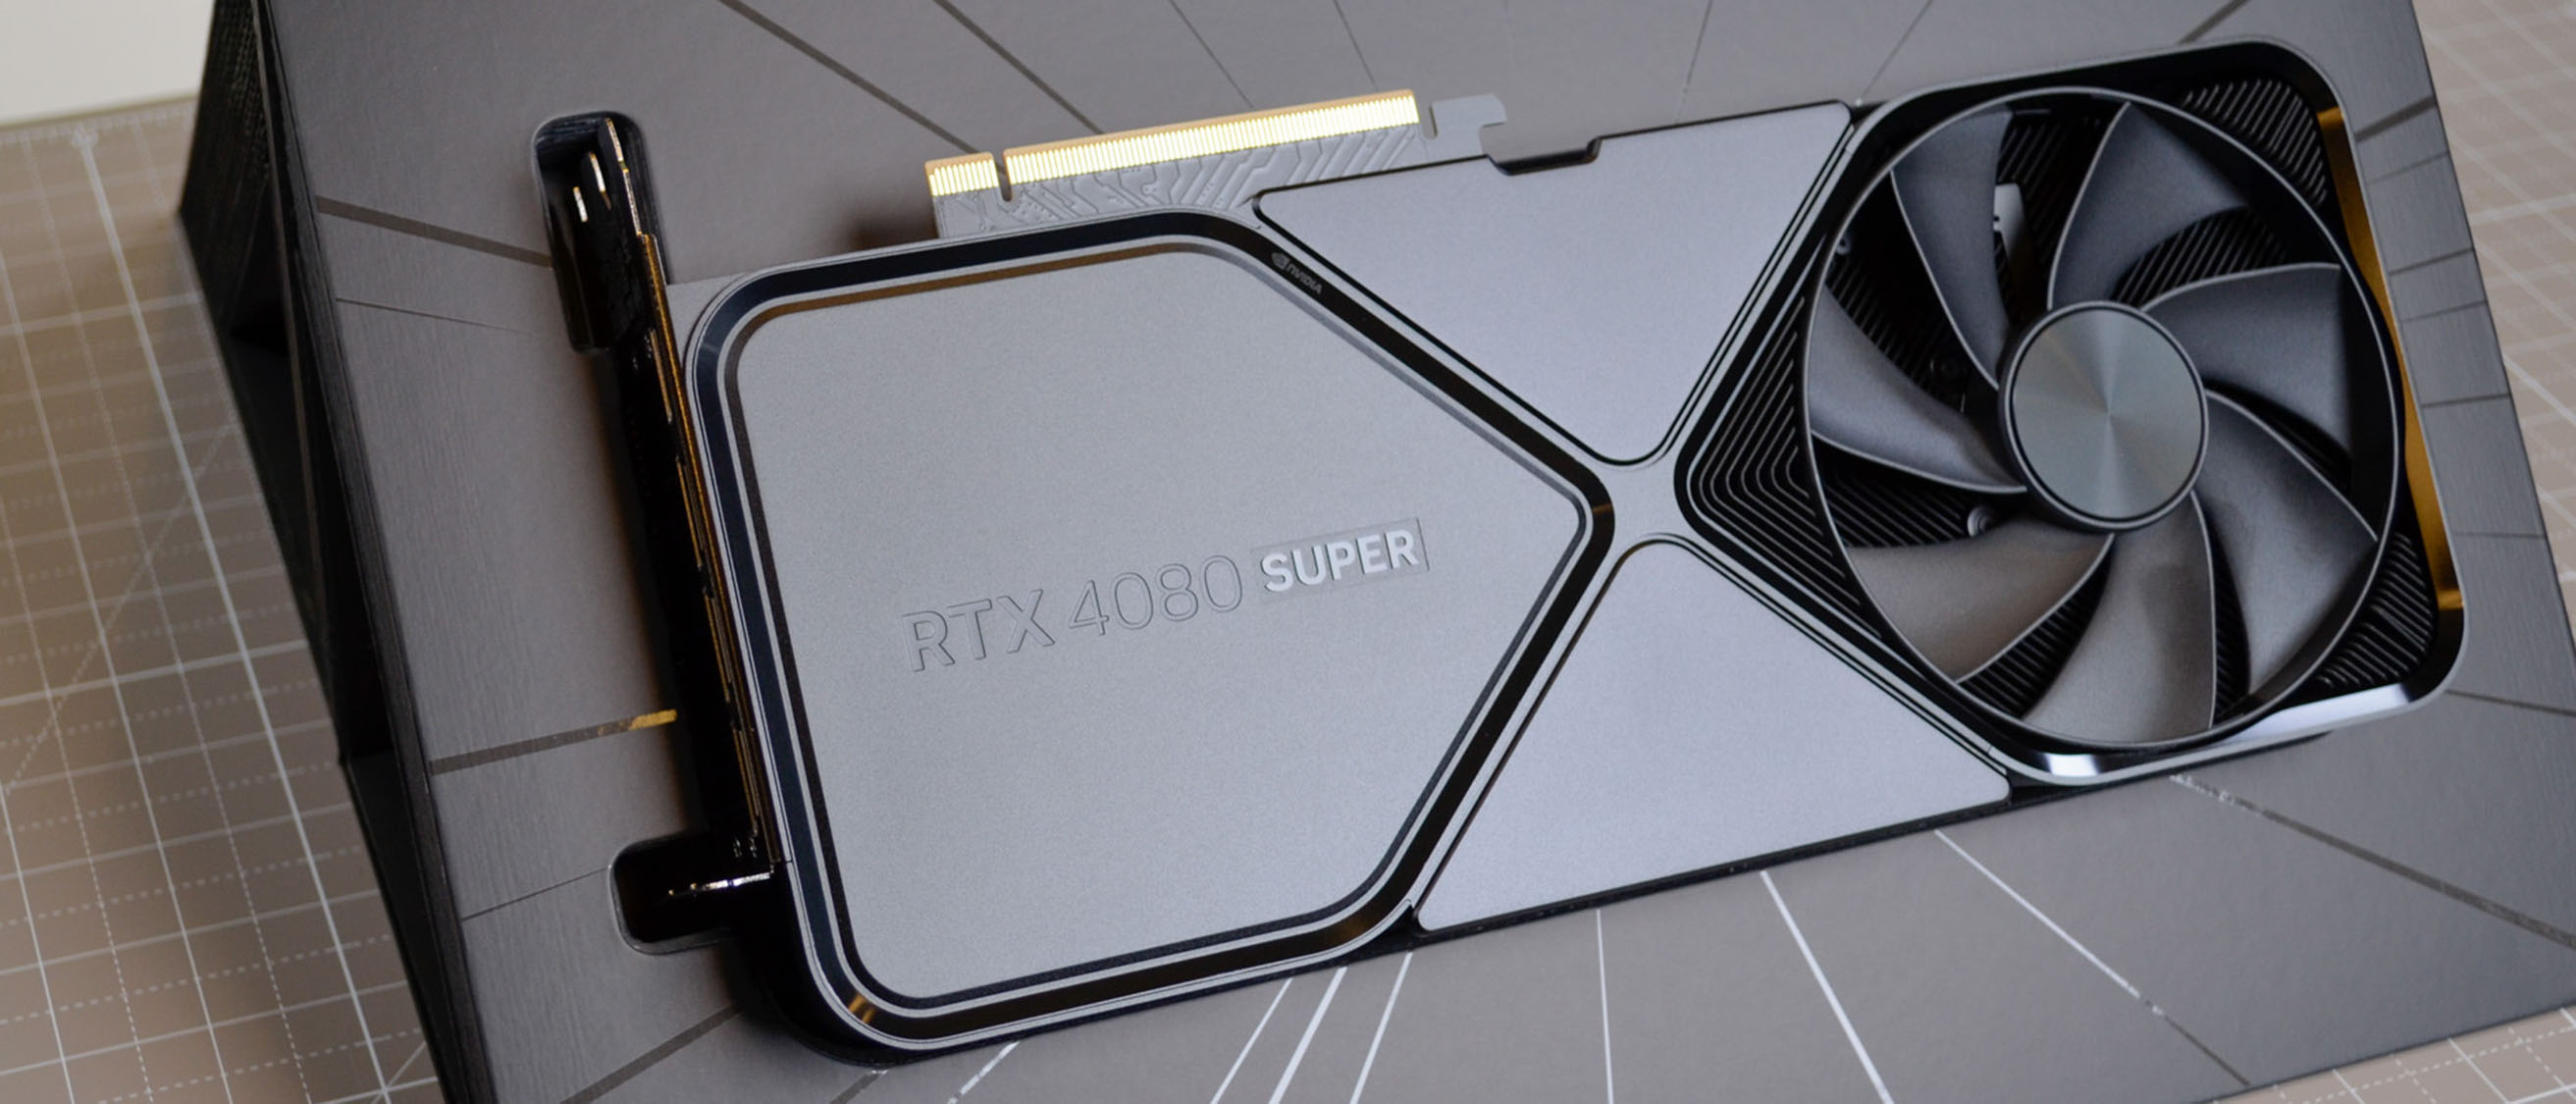 Nvidia GeForce RTX 4080 Super review: second only to the RTX 4090